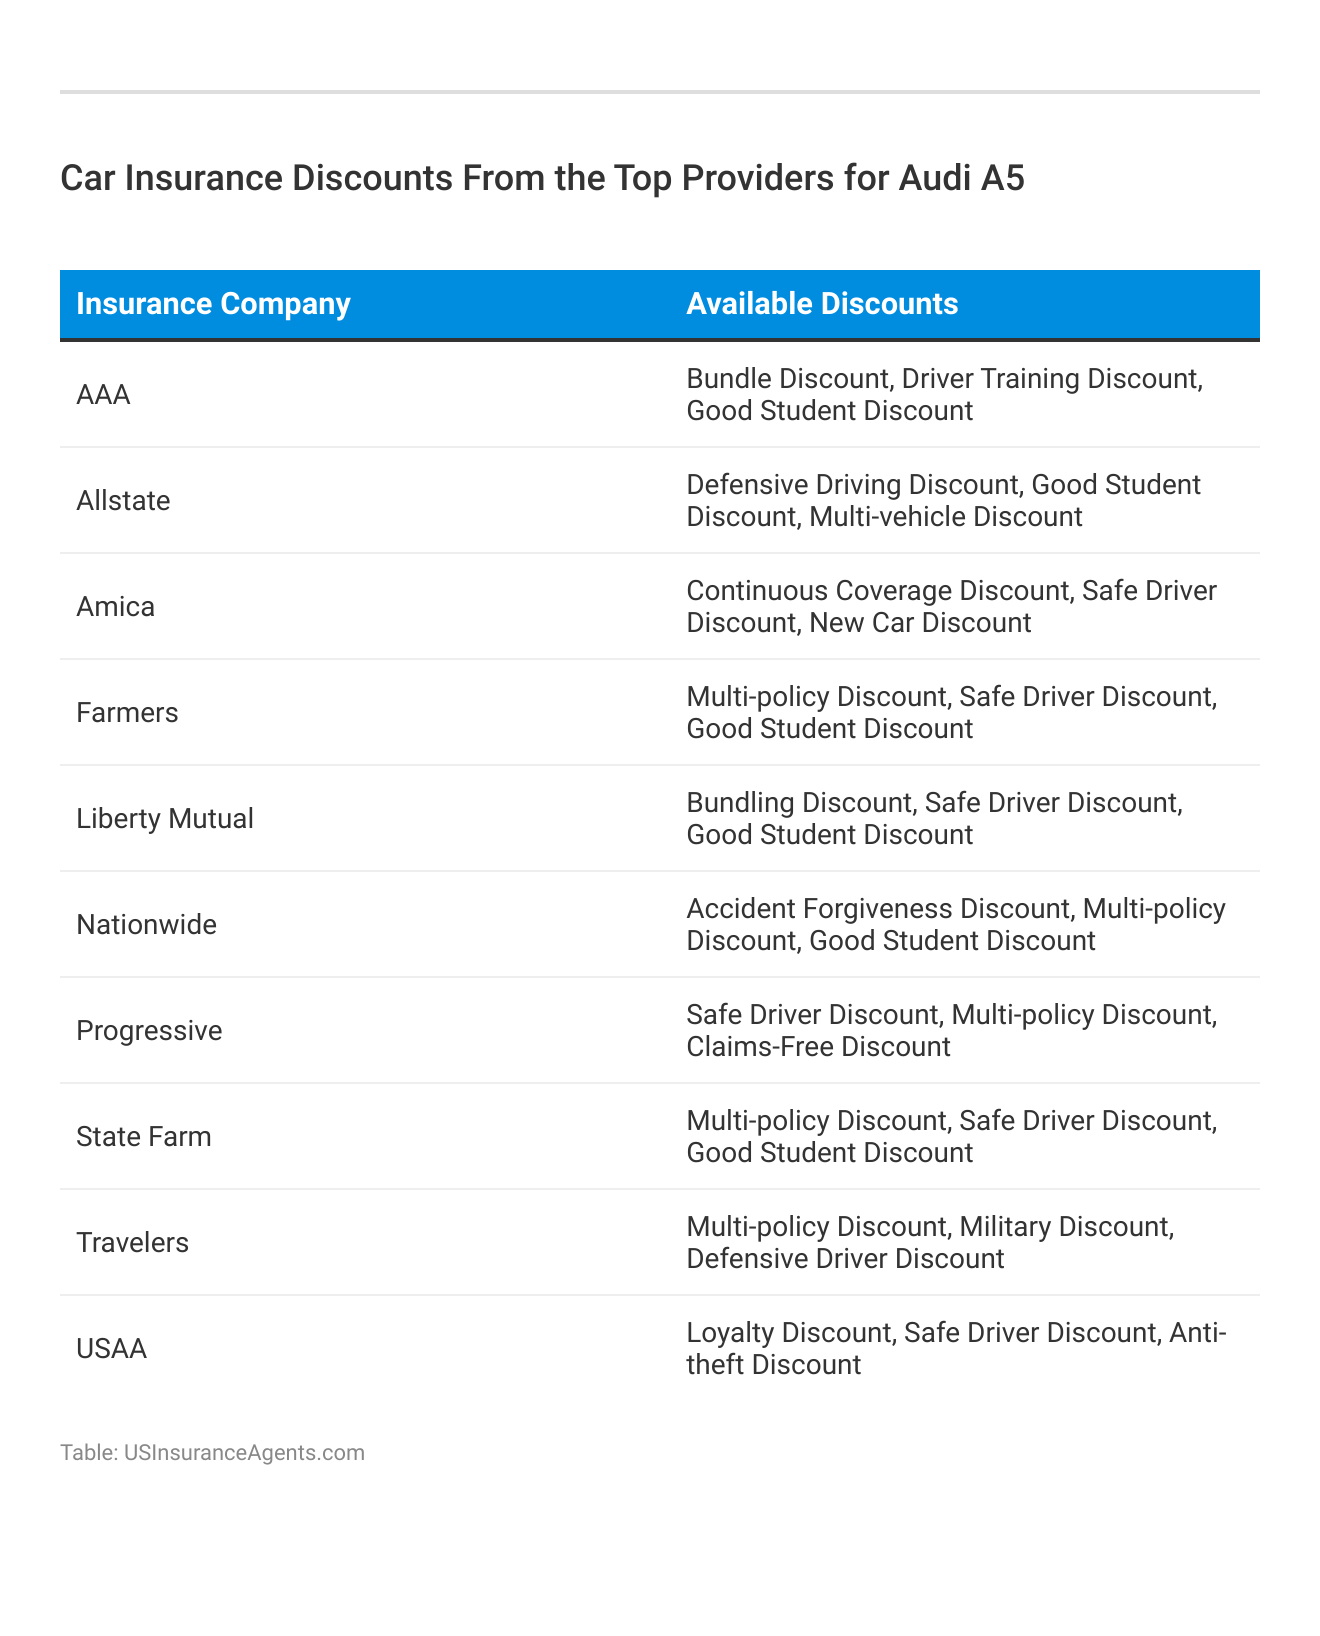 <h3>Car Insurance Discounts From the Top Providers for Audi A5</h3>